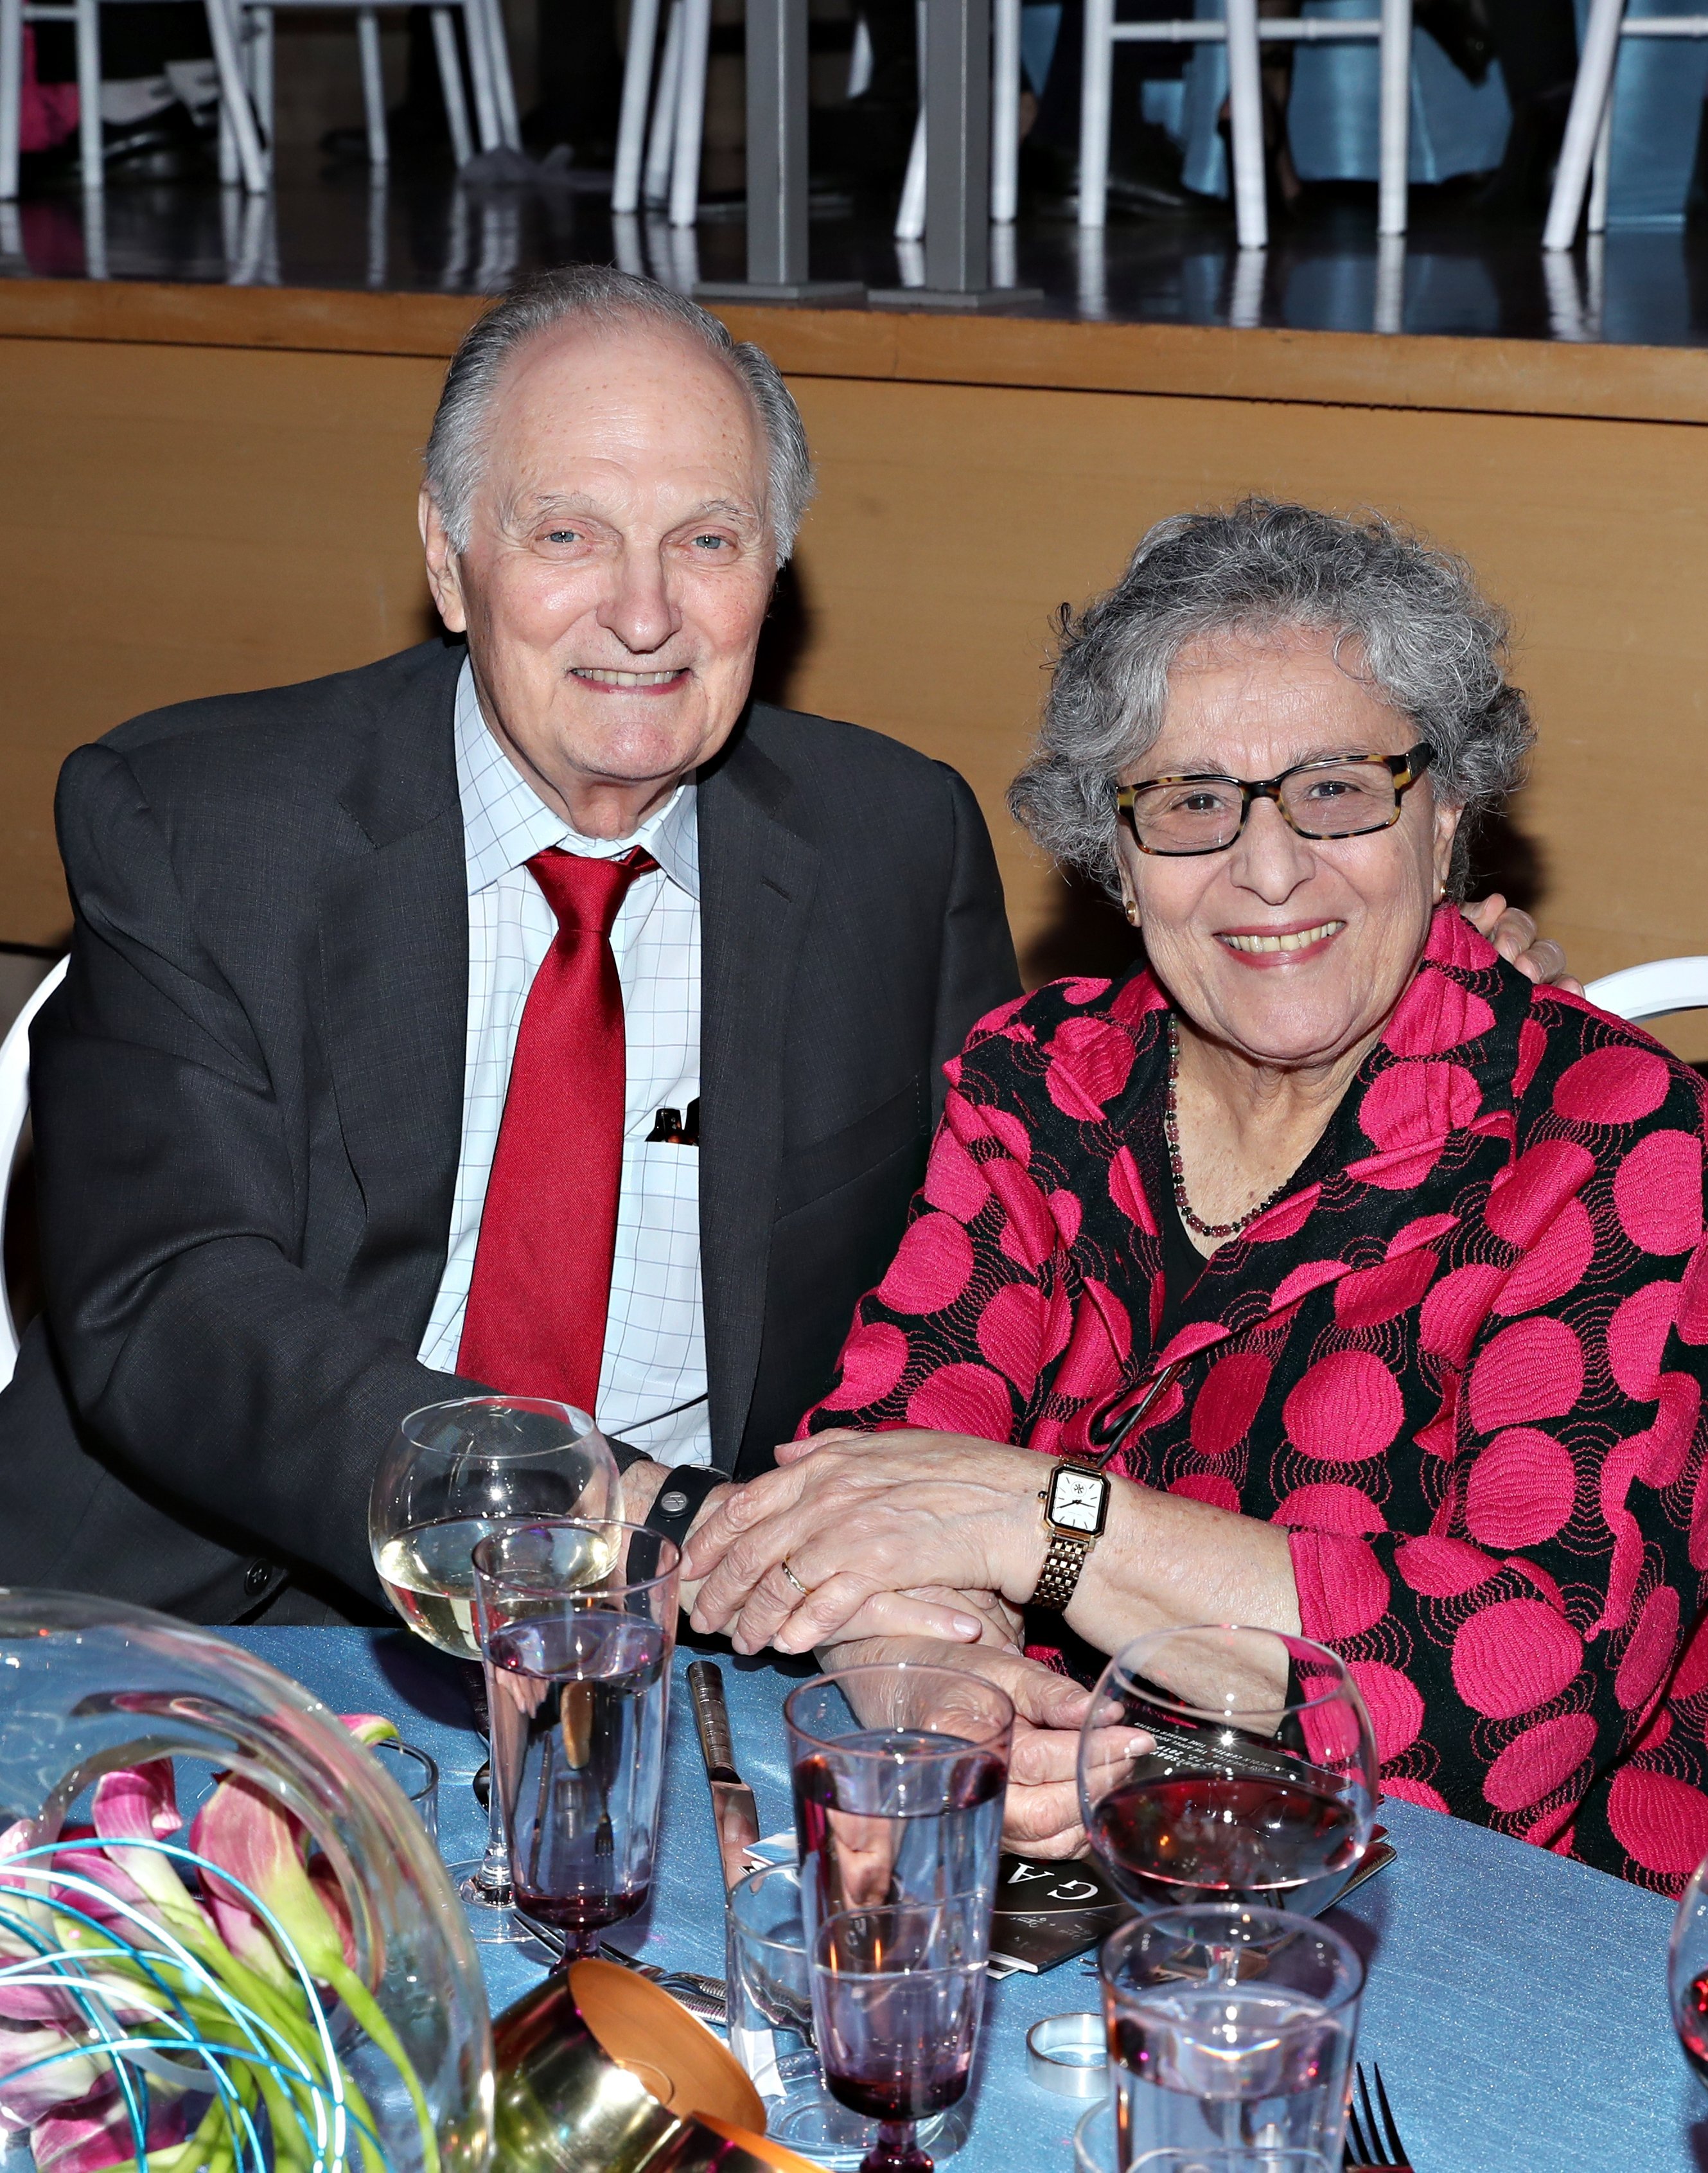 Alan Alda and his wife Arlene Alda attend the World Science Festival's Annual Gala in New York City on May 22, 2019 | Photo: Getty Images